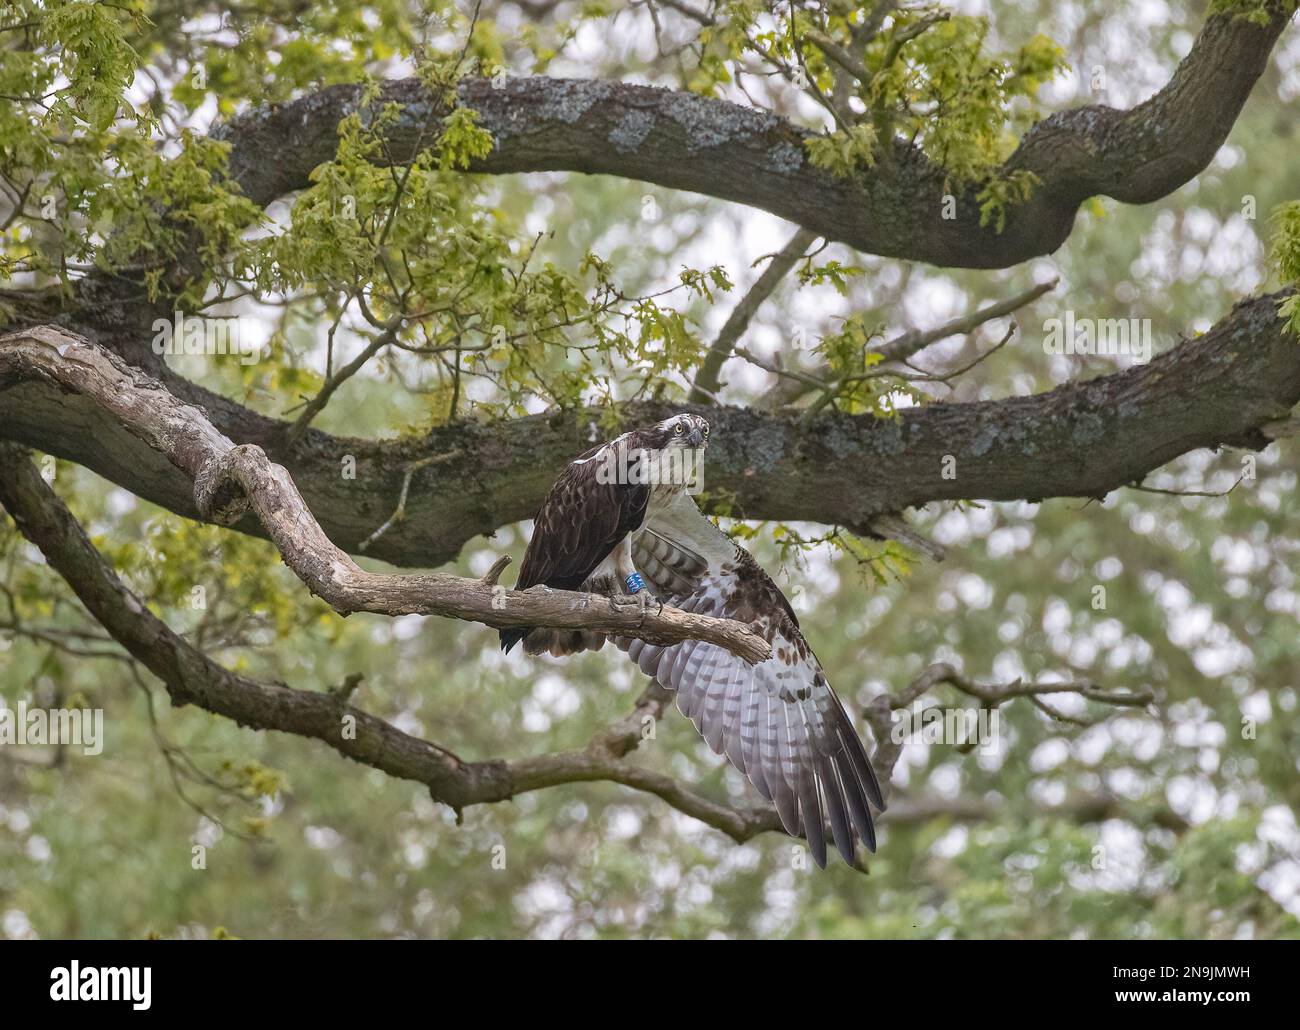 A shot of an Osprey (Pandion haliaetus) waiting and perched in  an oak tree. Stretching his wings out ready to dive for a fish  . Rutland UK Stock Photo